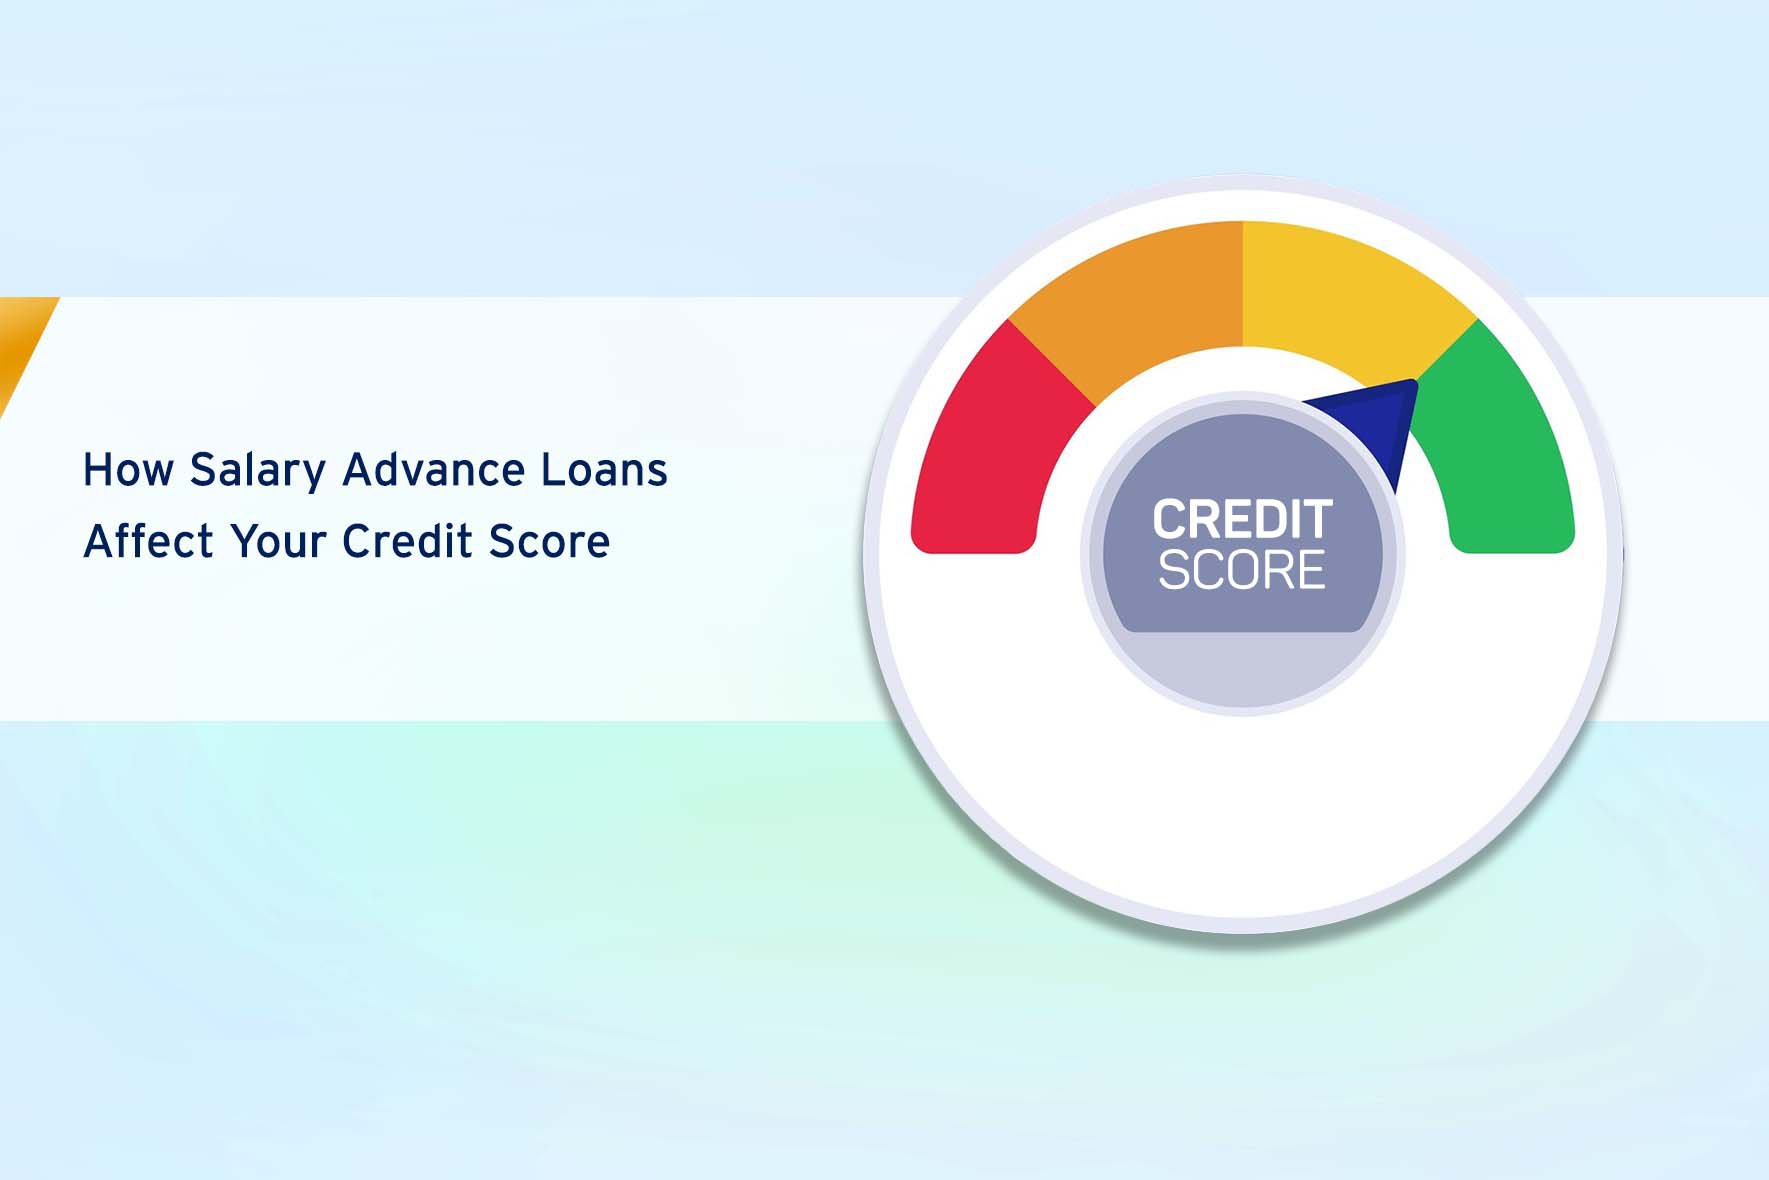 The Impact of Salary Advance Loan on Your Credit Score